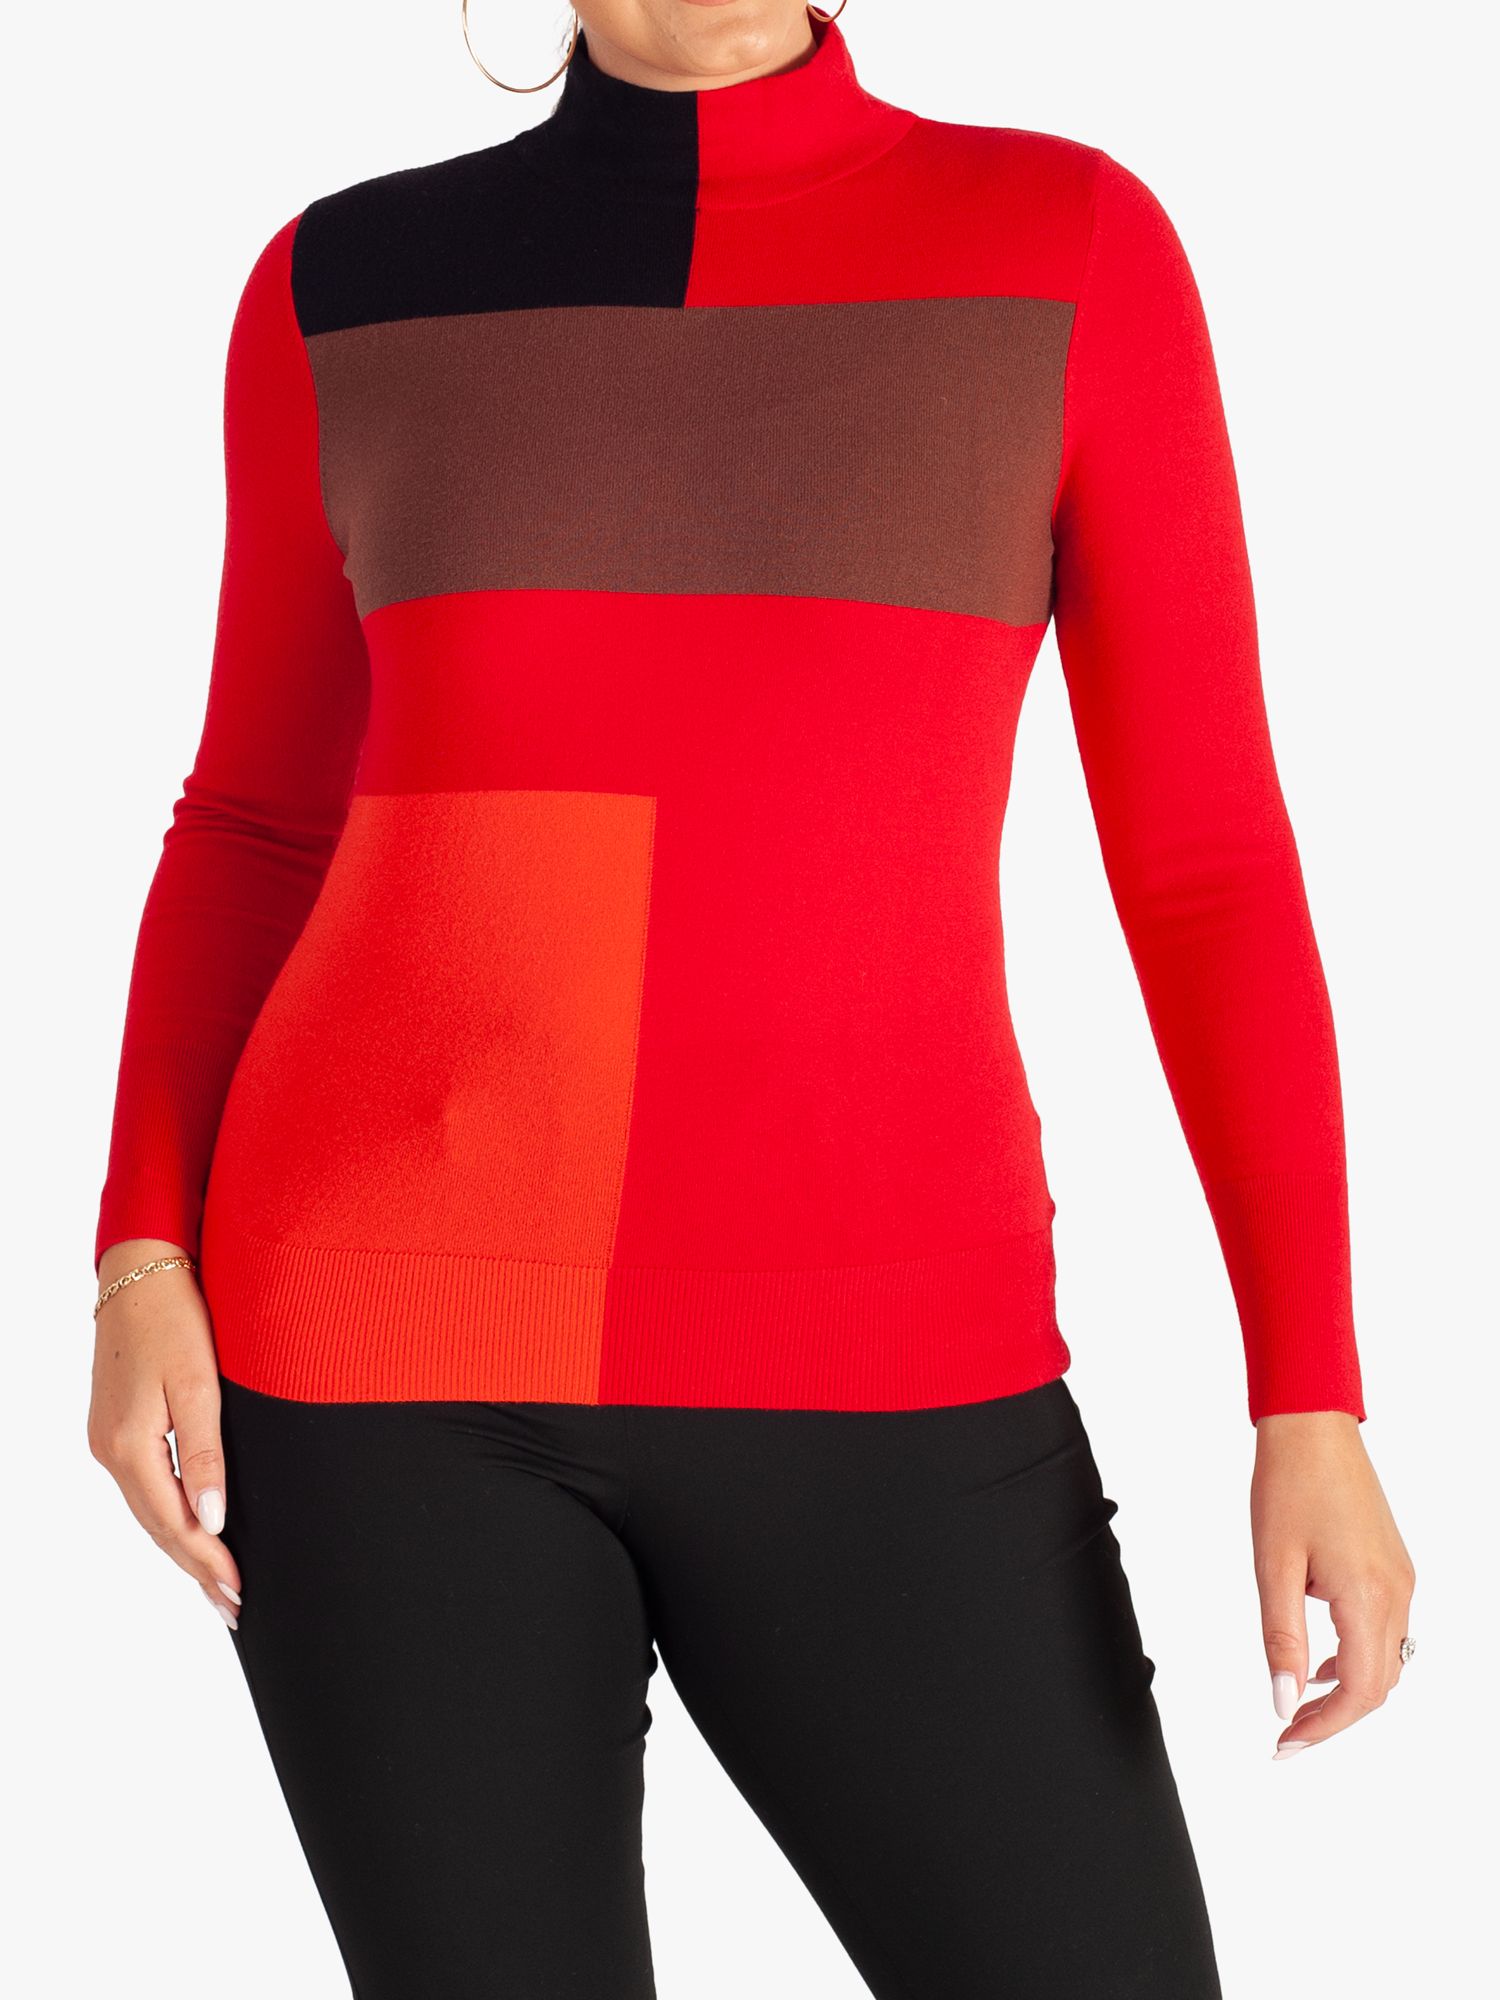 chesca Shapes Jumper, Red, 18-20